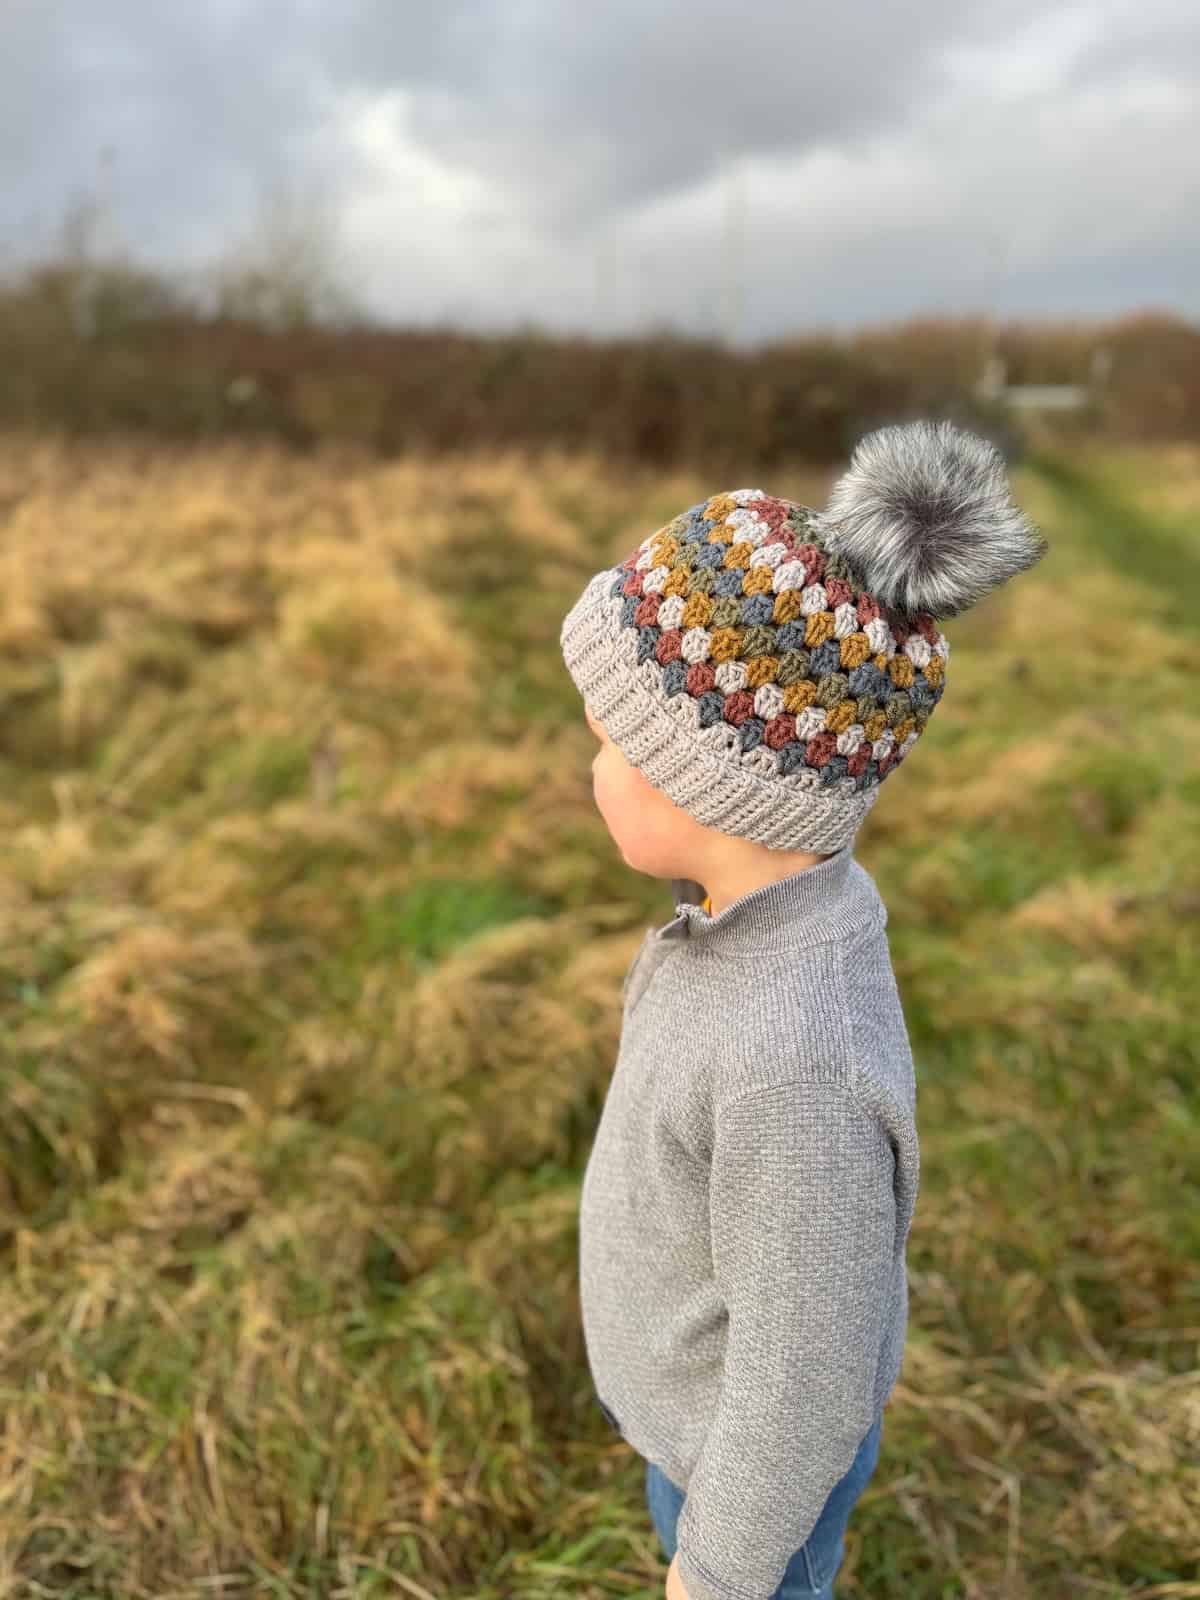 A young boy in a hat standing in a field.